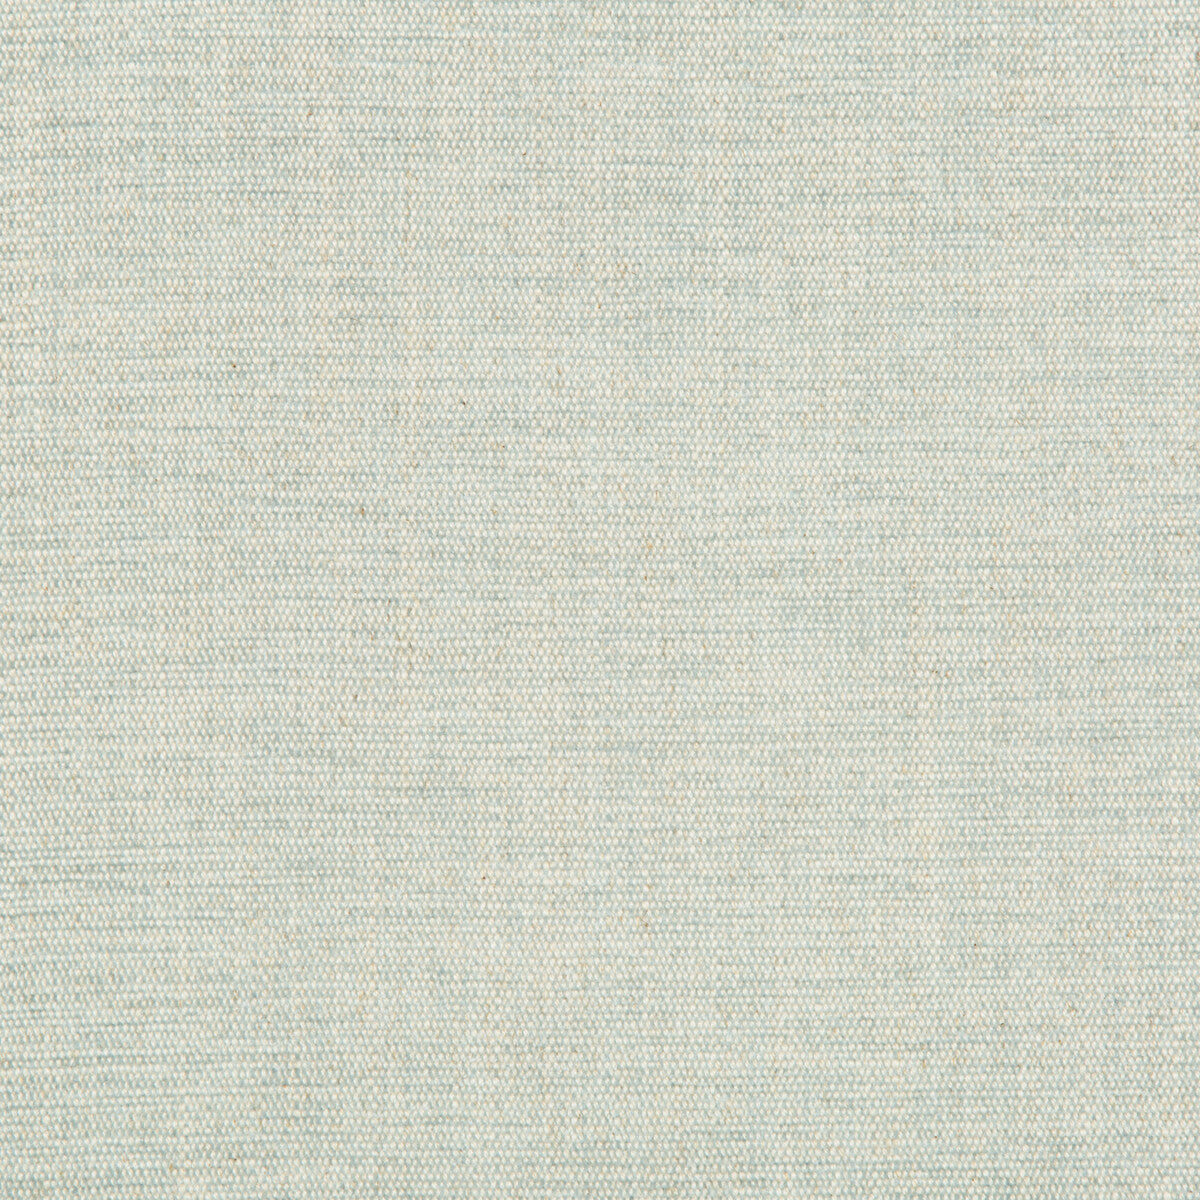 Rutledge fabric in spa color - pattern 35297.115.0 - by Kravet Basics in the Greenwich collection